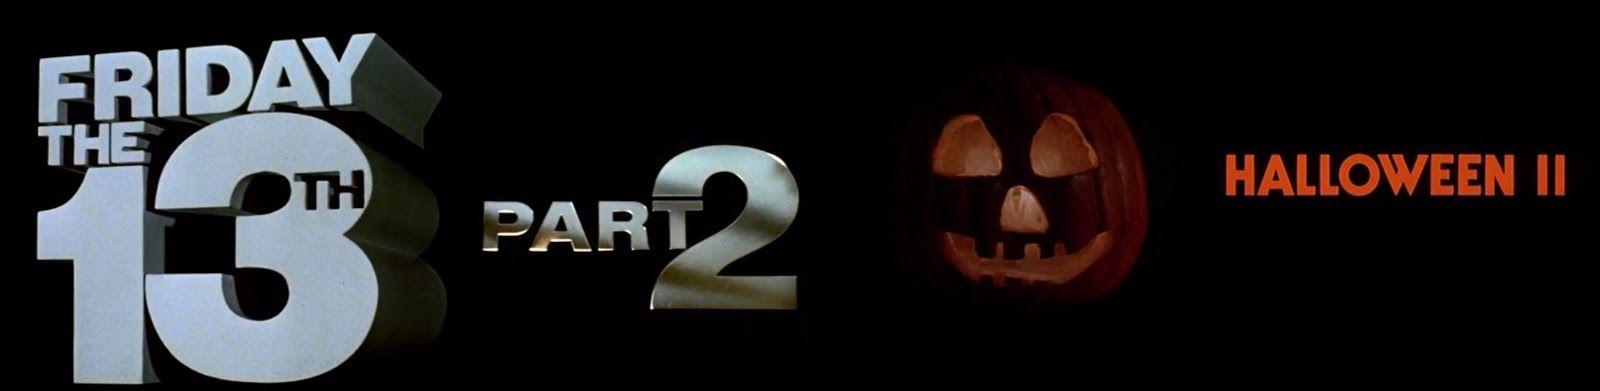 Friday the 13th Part 2 Logo - Competing Film Showdown: COMPETING FILM SHOWDOWN the 13th